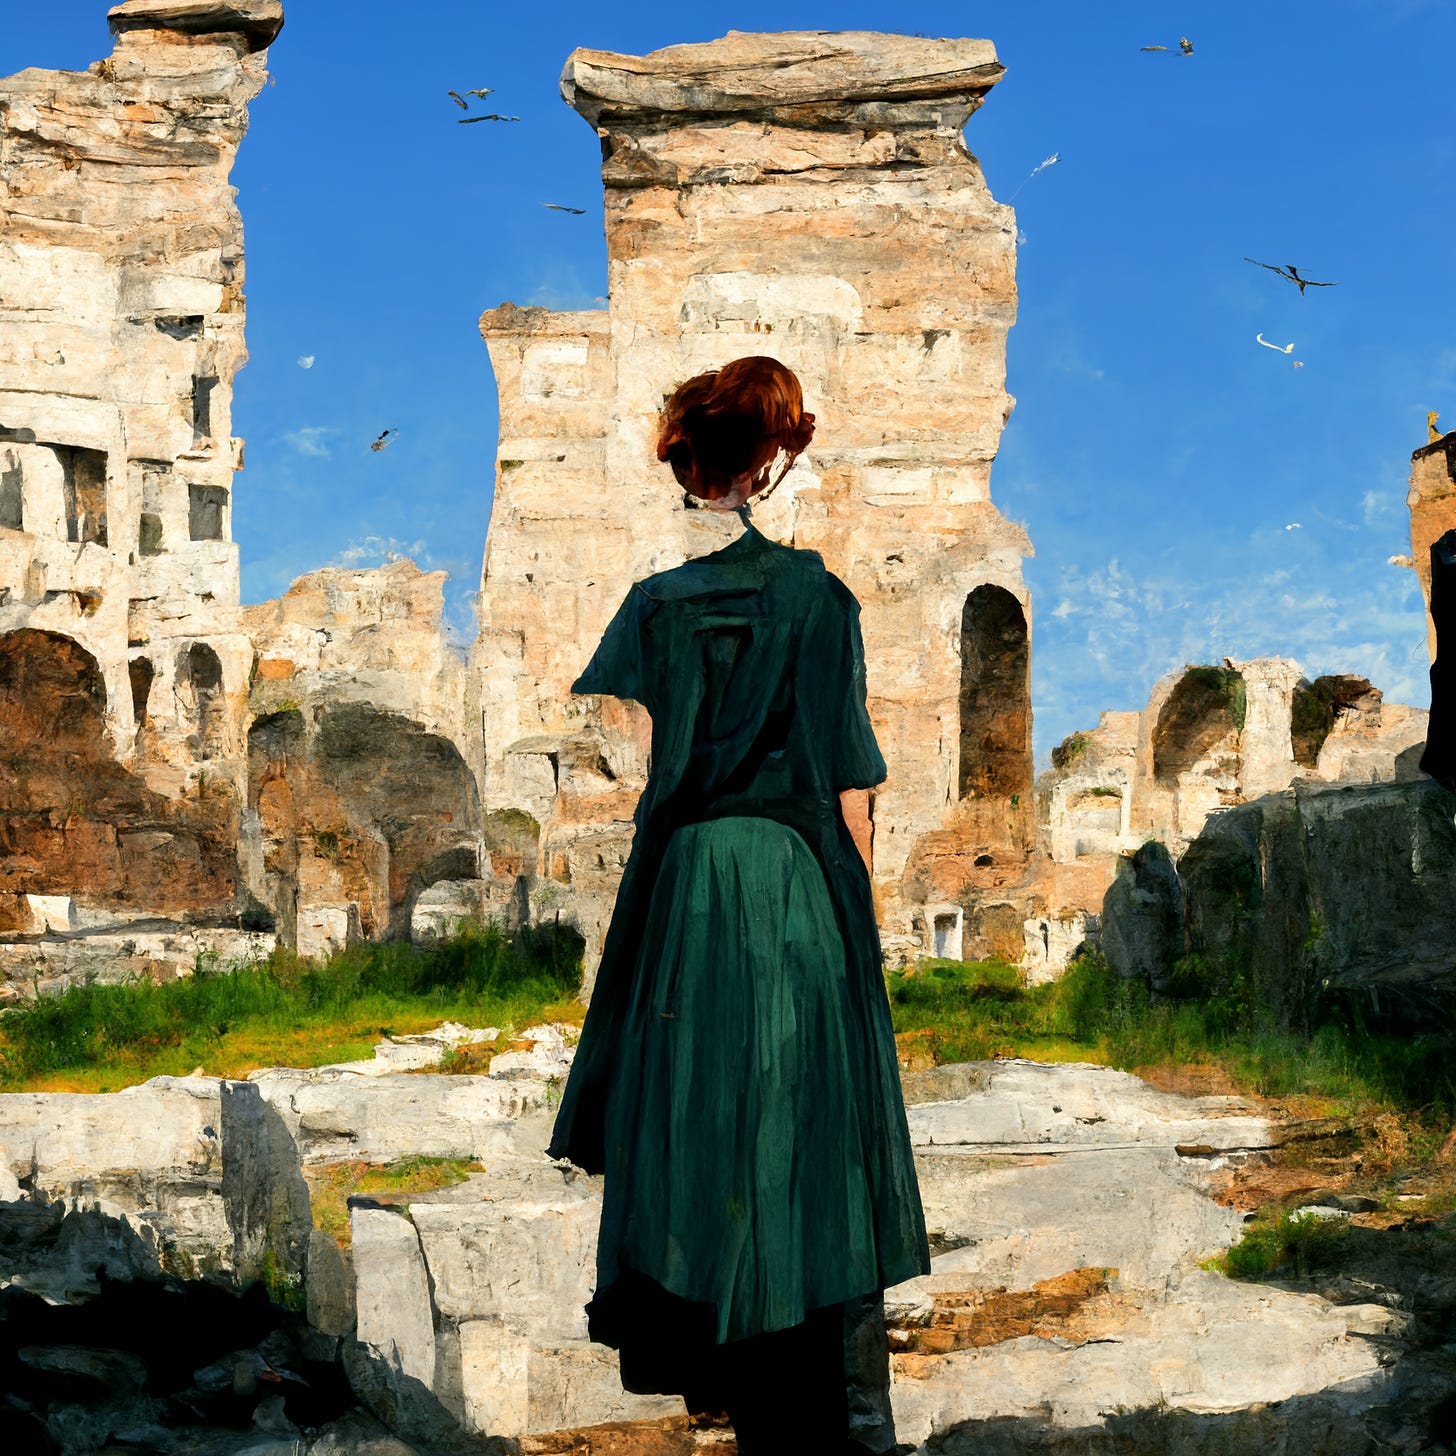 A young woman looks out at the ruins of Ancient Rome. Her dress, which is green, is of an old-fashioned style, and her outline seems to be partly vanishing into the scene.